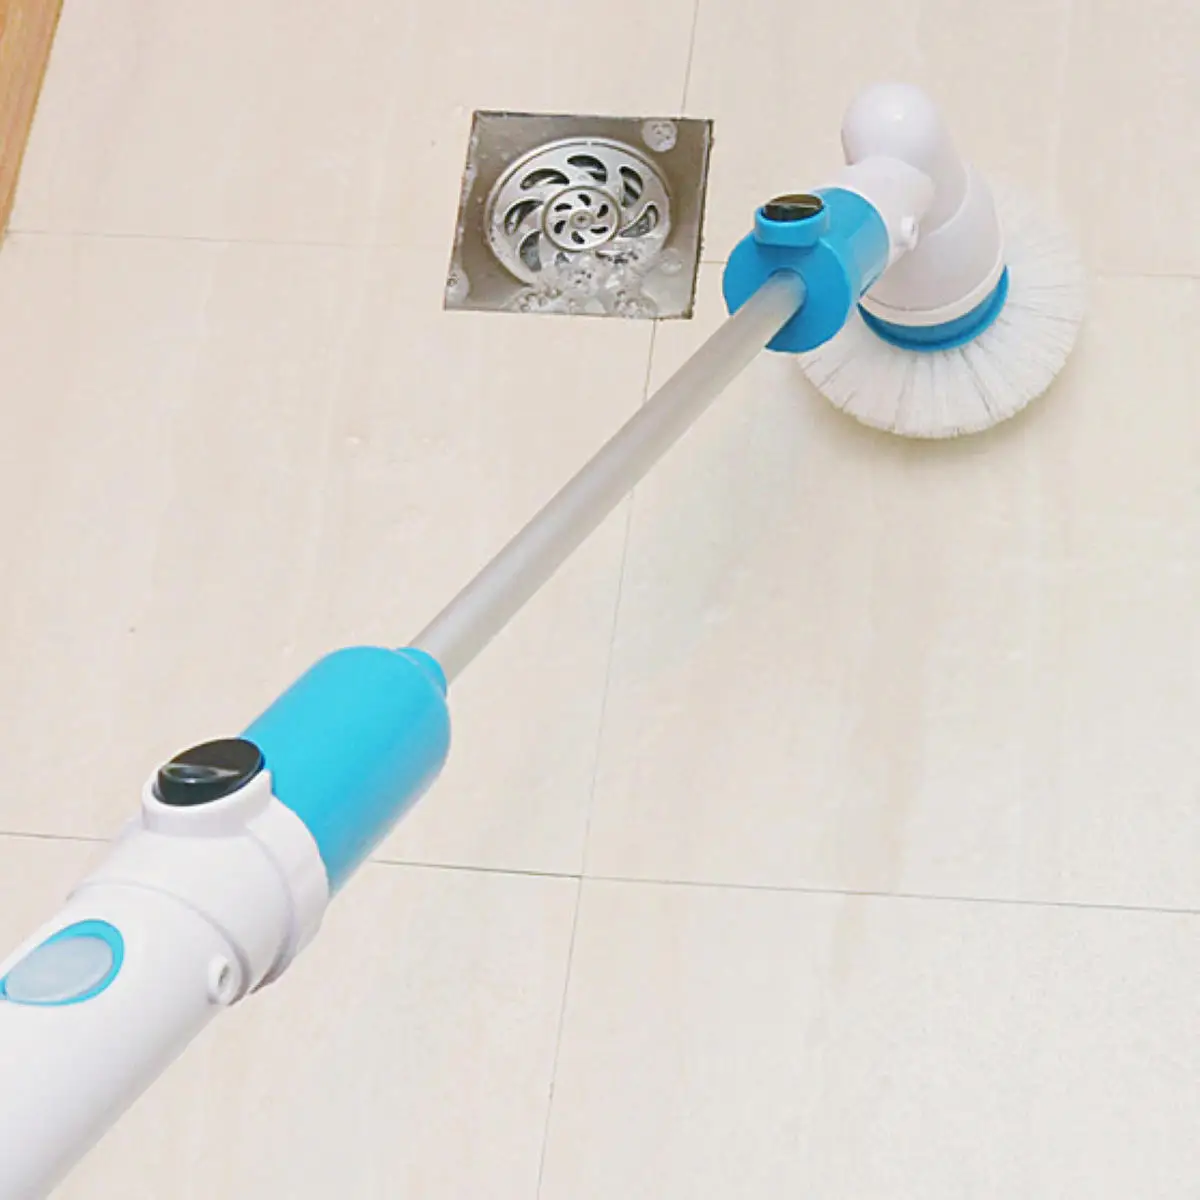 https://ae01.alicdn.com/kf/H0dac8e284f0e4197aa7fe073c21335f5F/New-Electric-Cordless-Rechargeable-Power-Scrubber-Toilet-Tiles-Floor-Cleaner-Brush-Mop-ABS-Bathroom-Kitchen-Tub.jpg